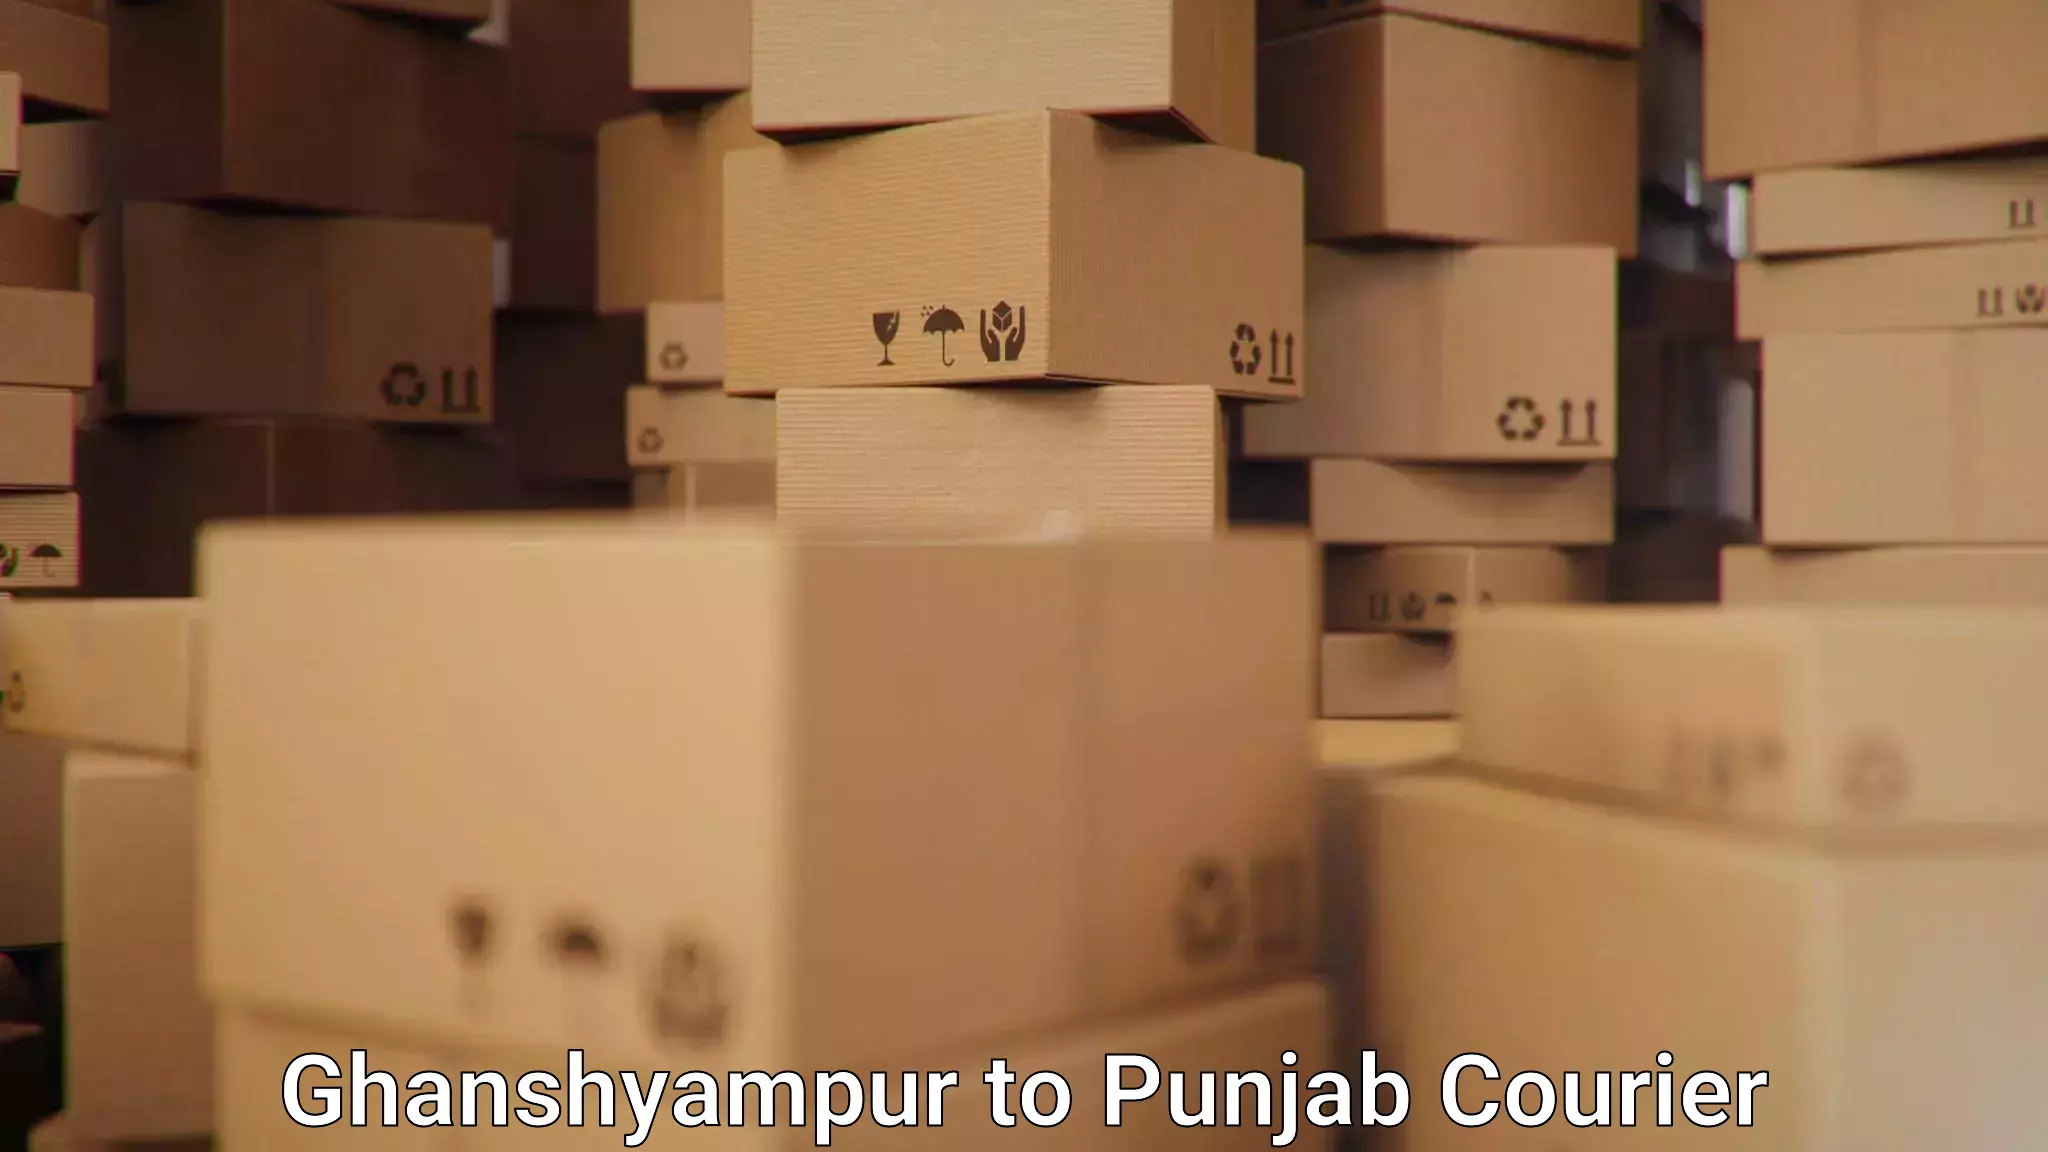 Reliable shipping partners Ghanshyampur to Khanna